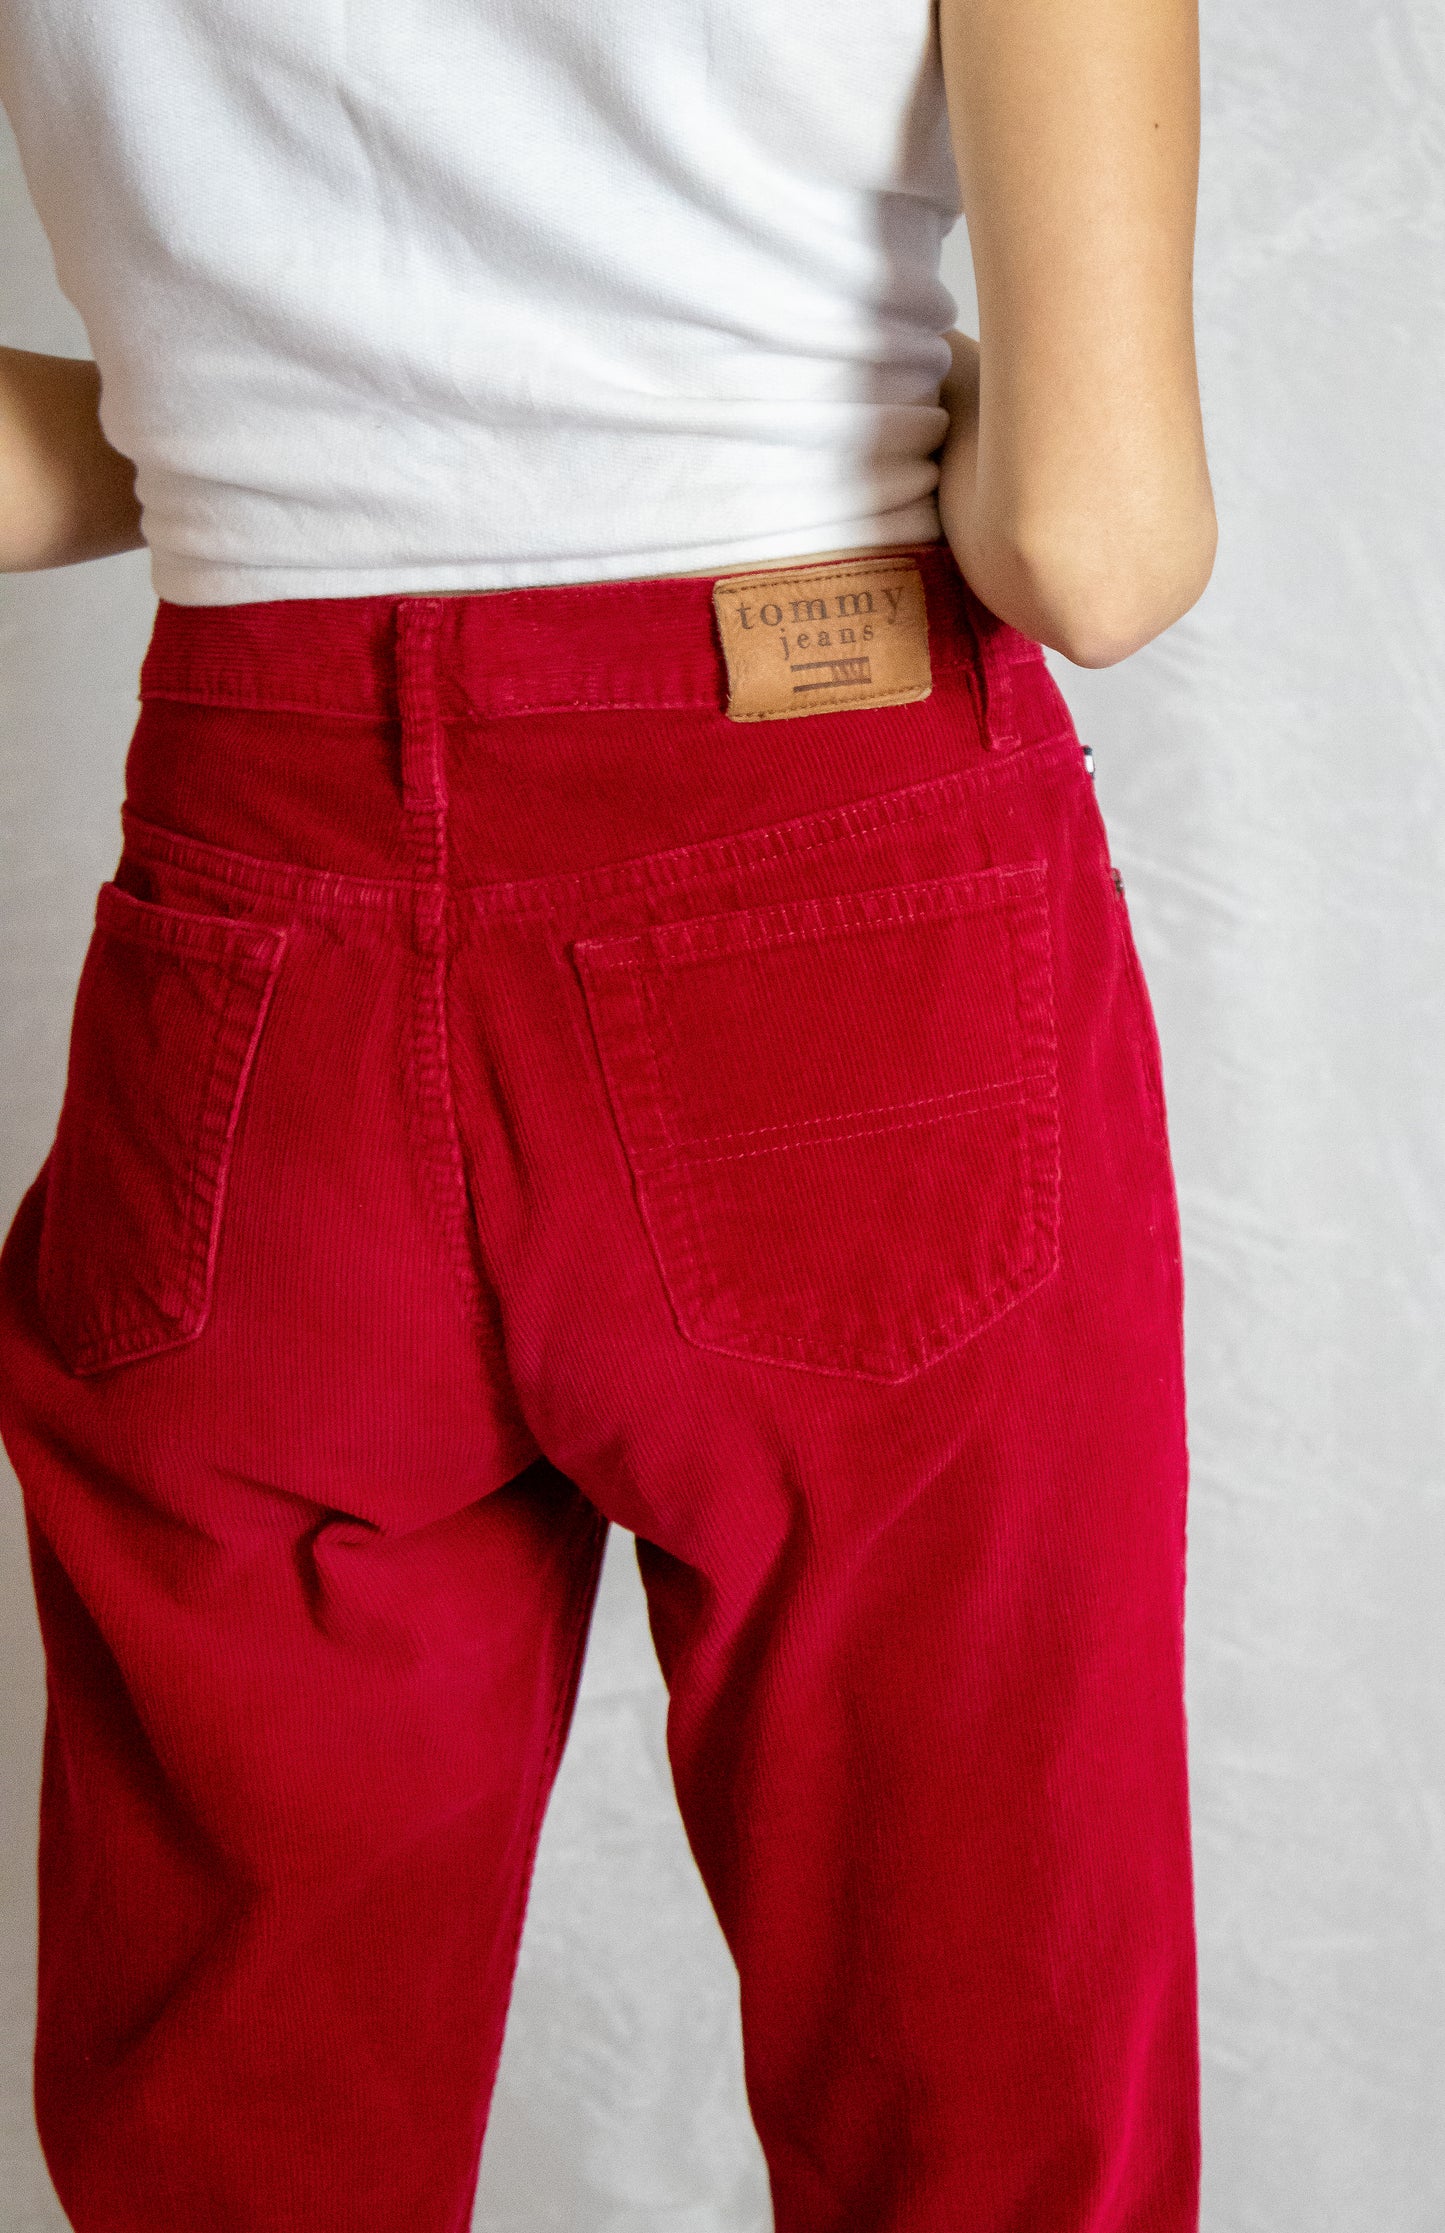 Red Tommy Hilfiger Corduroy Pants - 28”